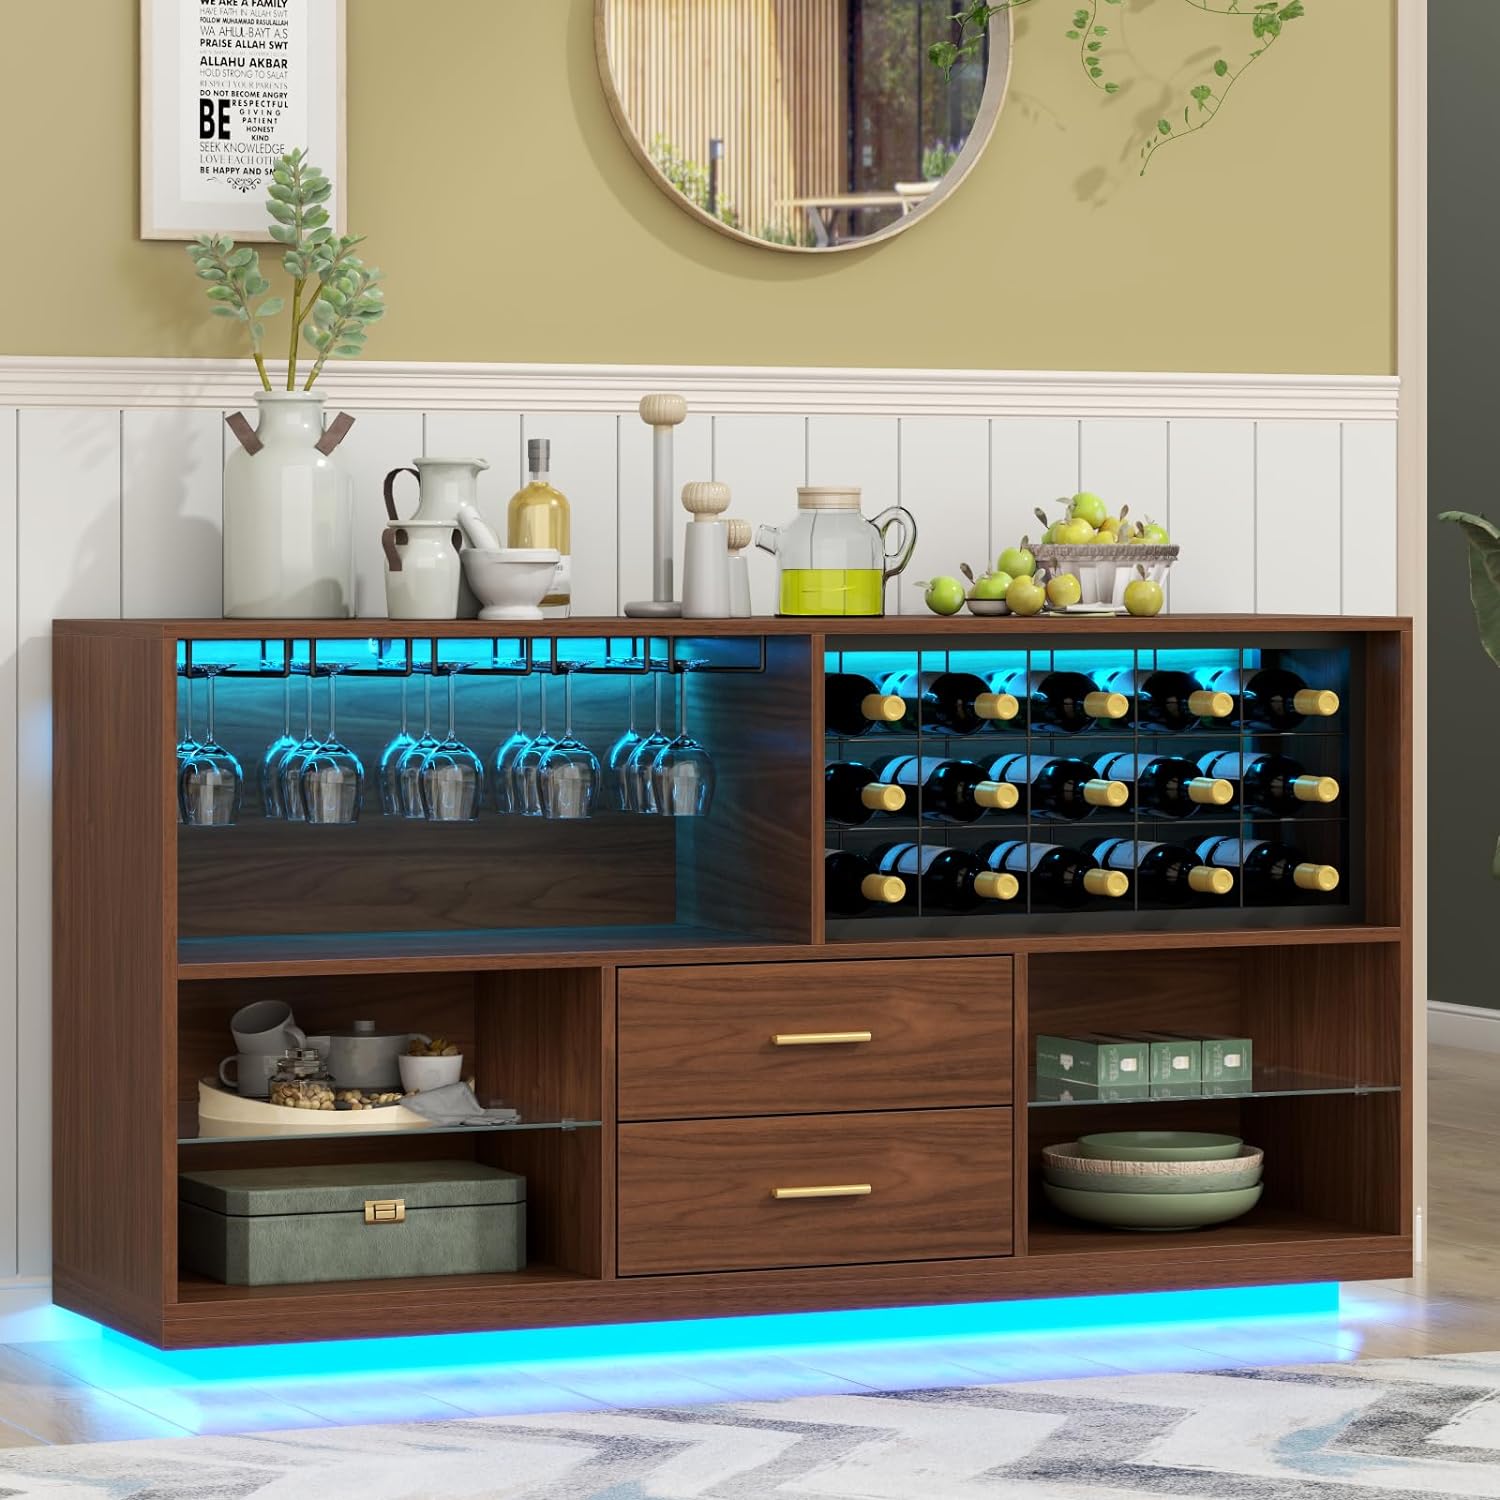 Gyfimoie Wine Bar Cabinet with Drawers and LED Lights - image 1 of 5